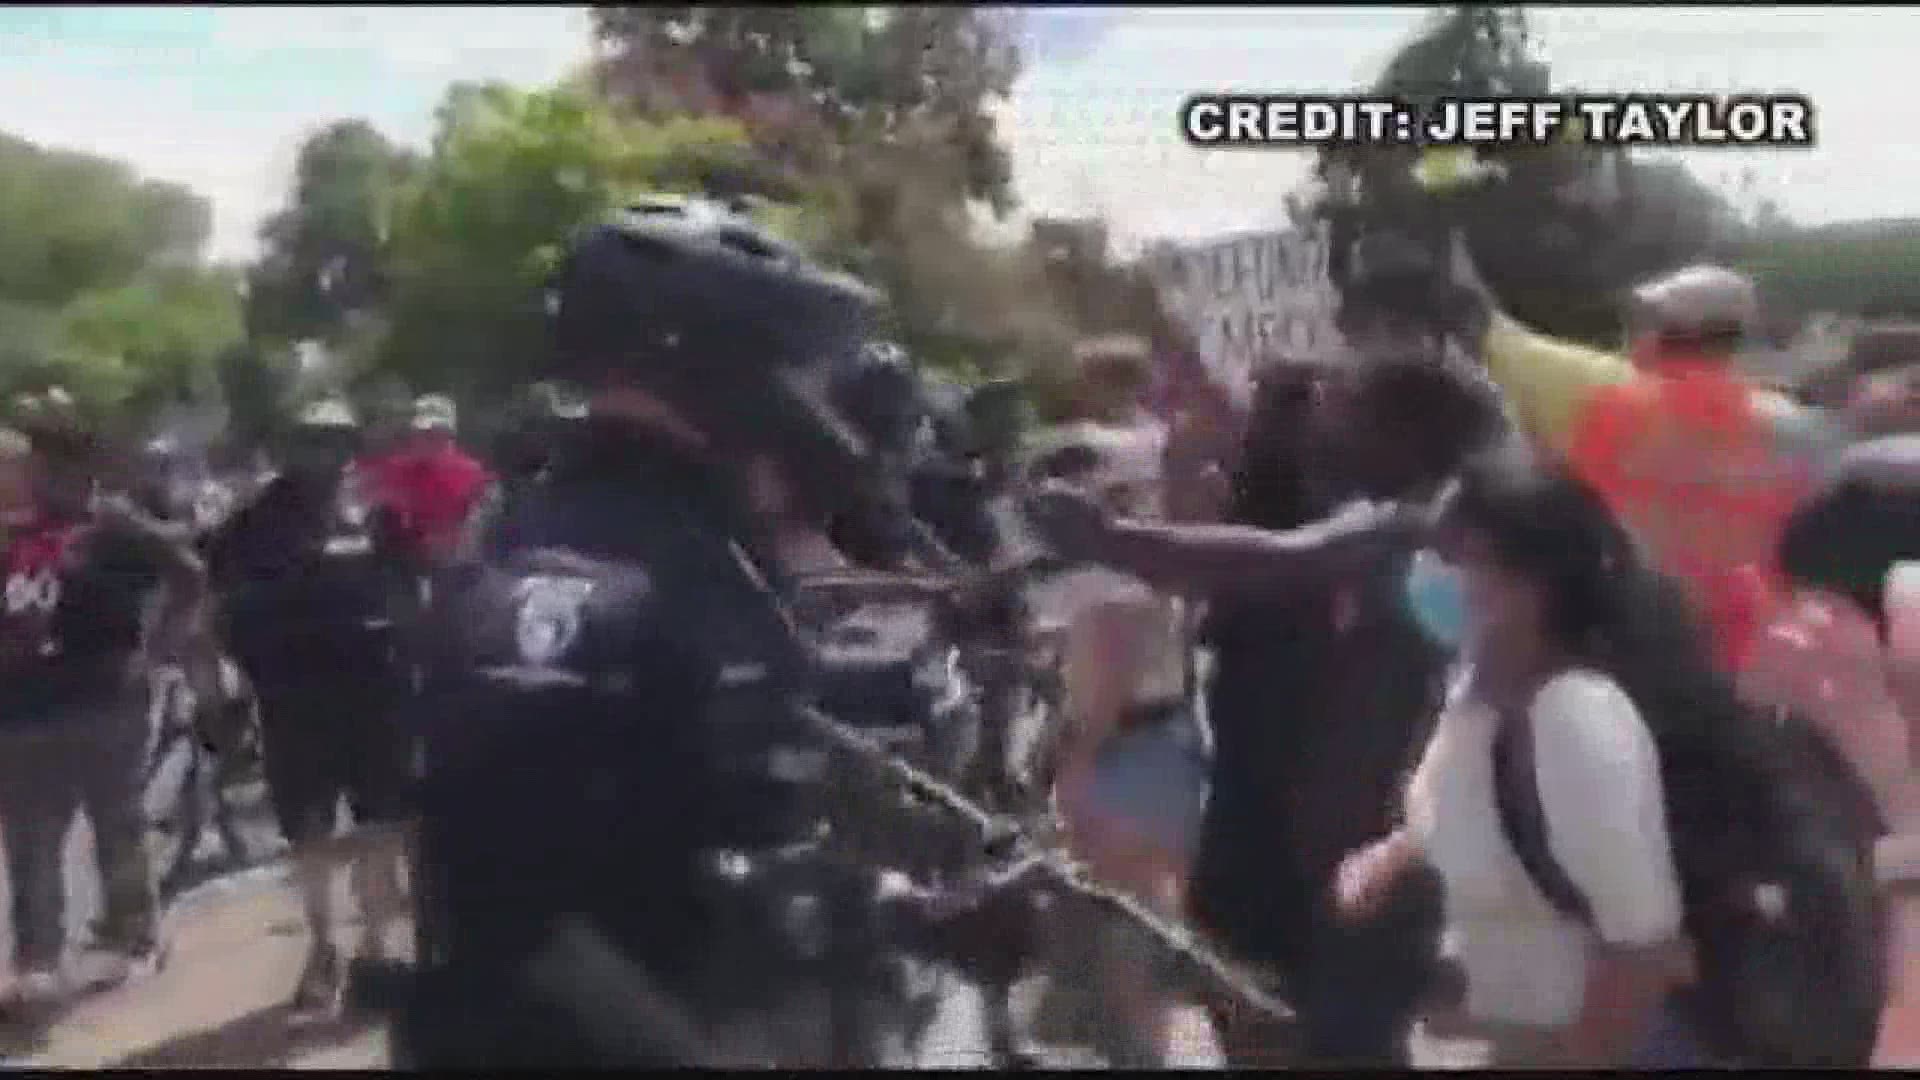 An officer was seen using pepper spray on a group of protesters. CMPD said it was in response to a protester attempting to steal an officer's bike.